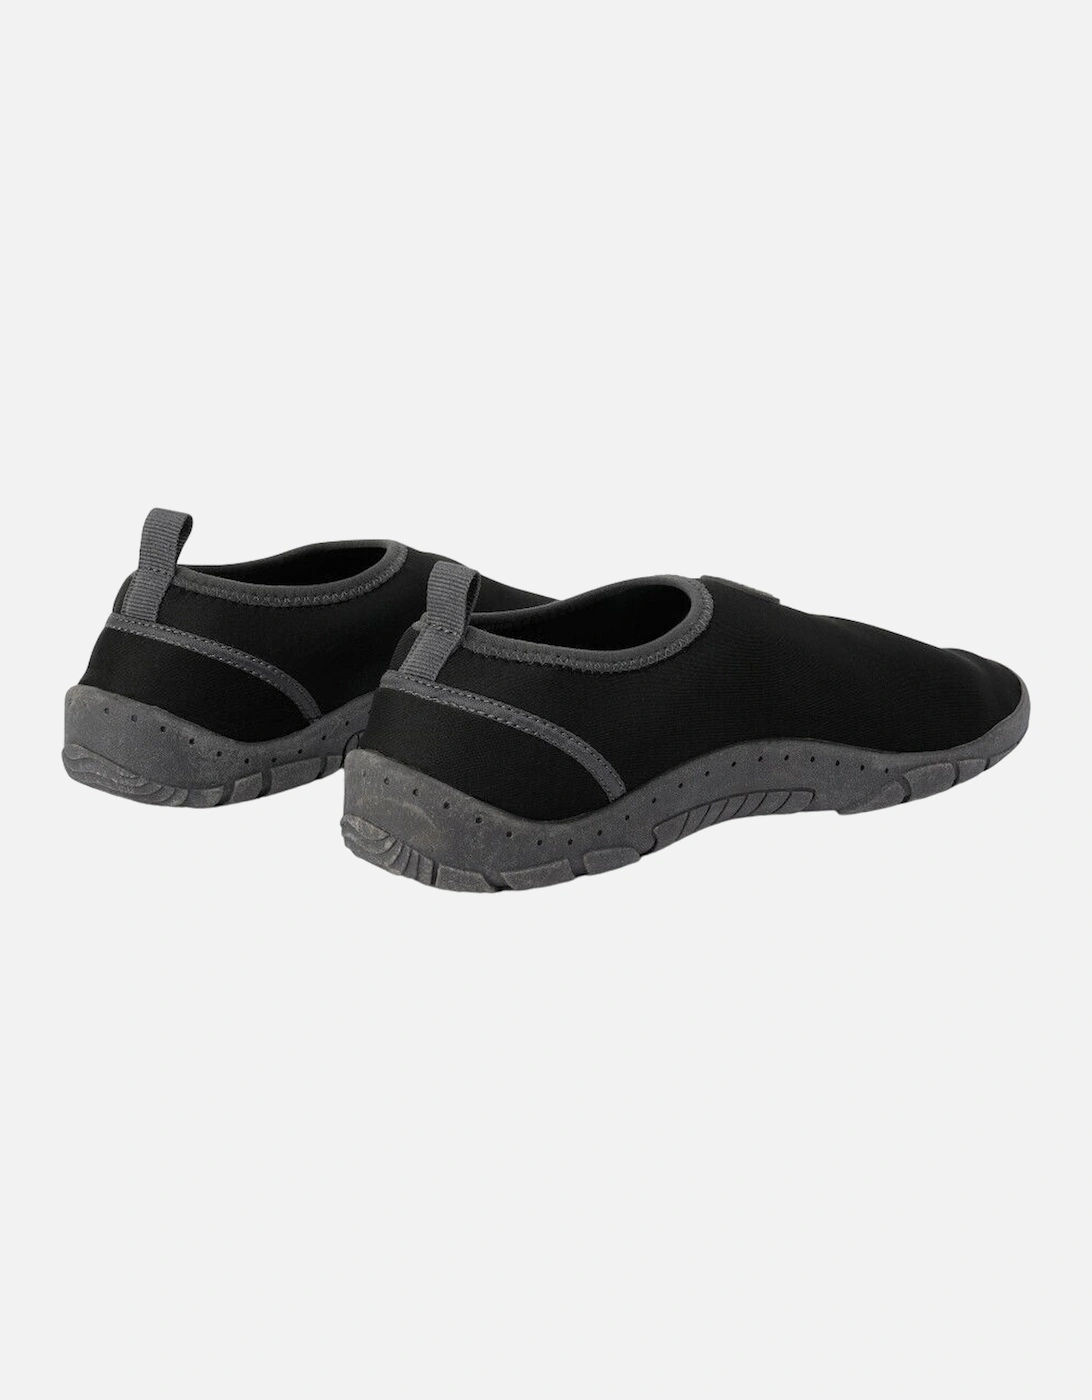 Mens Jetty II Water Shoes